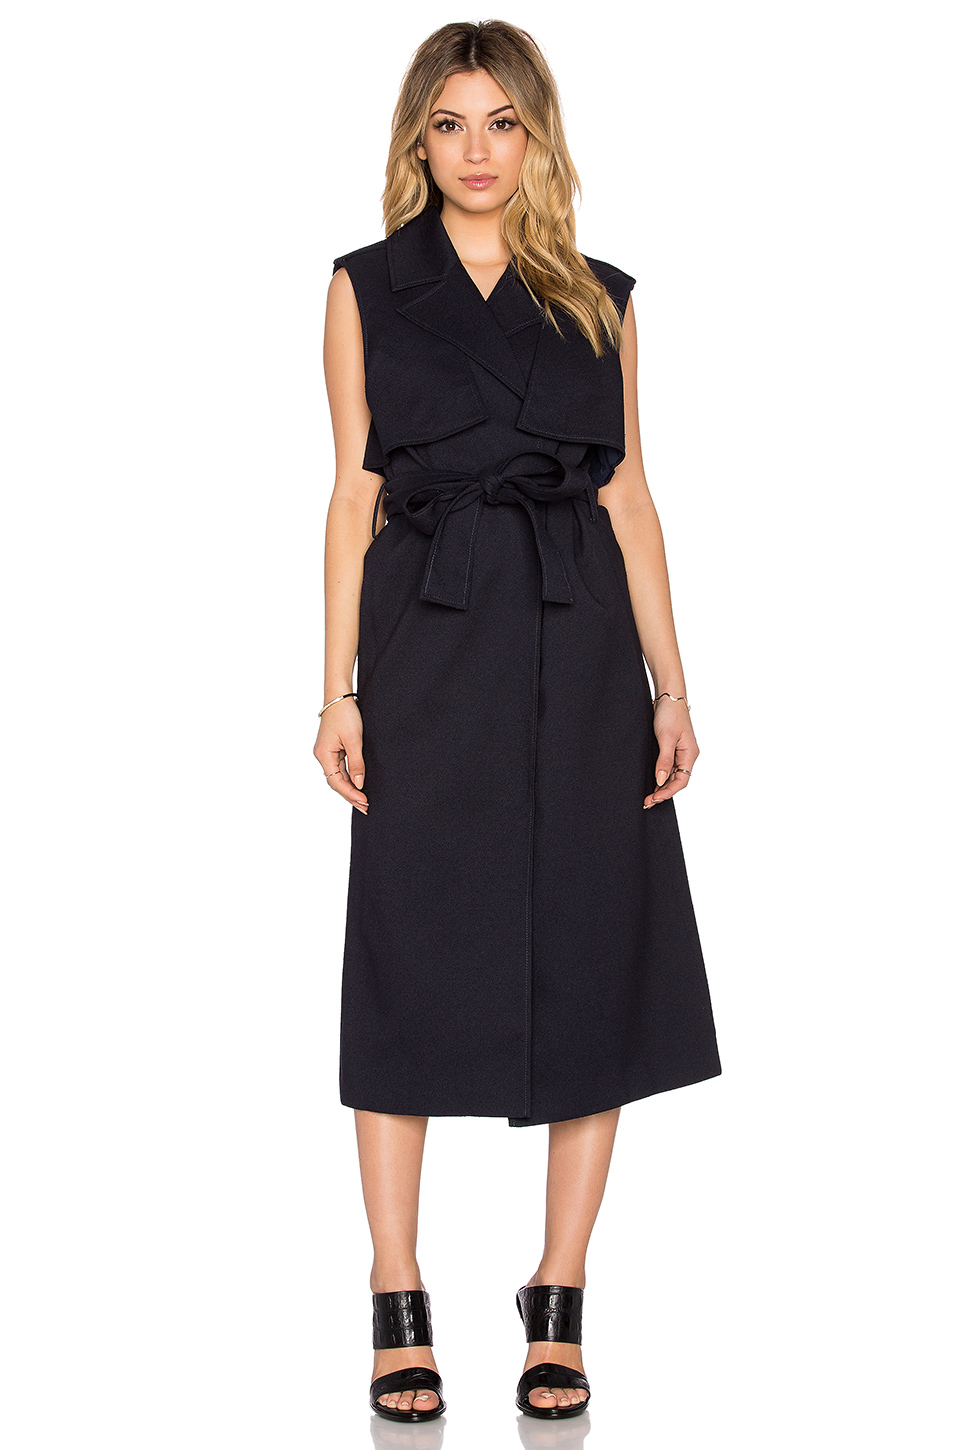  Finders Keepers Get Up Vest Dress. Revolve Clothing. Was: $200. Now: $76. 